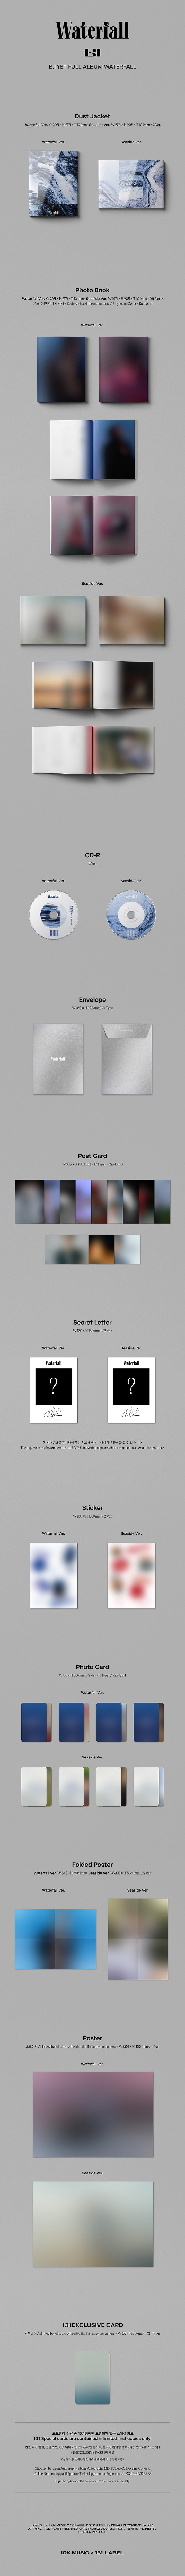 1 CD
1 Photo Book (96 pages, random out of 2 types per version)
1 Envelope
3 Post Card (random out of 12 types)
1 Secret L...